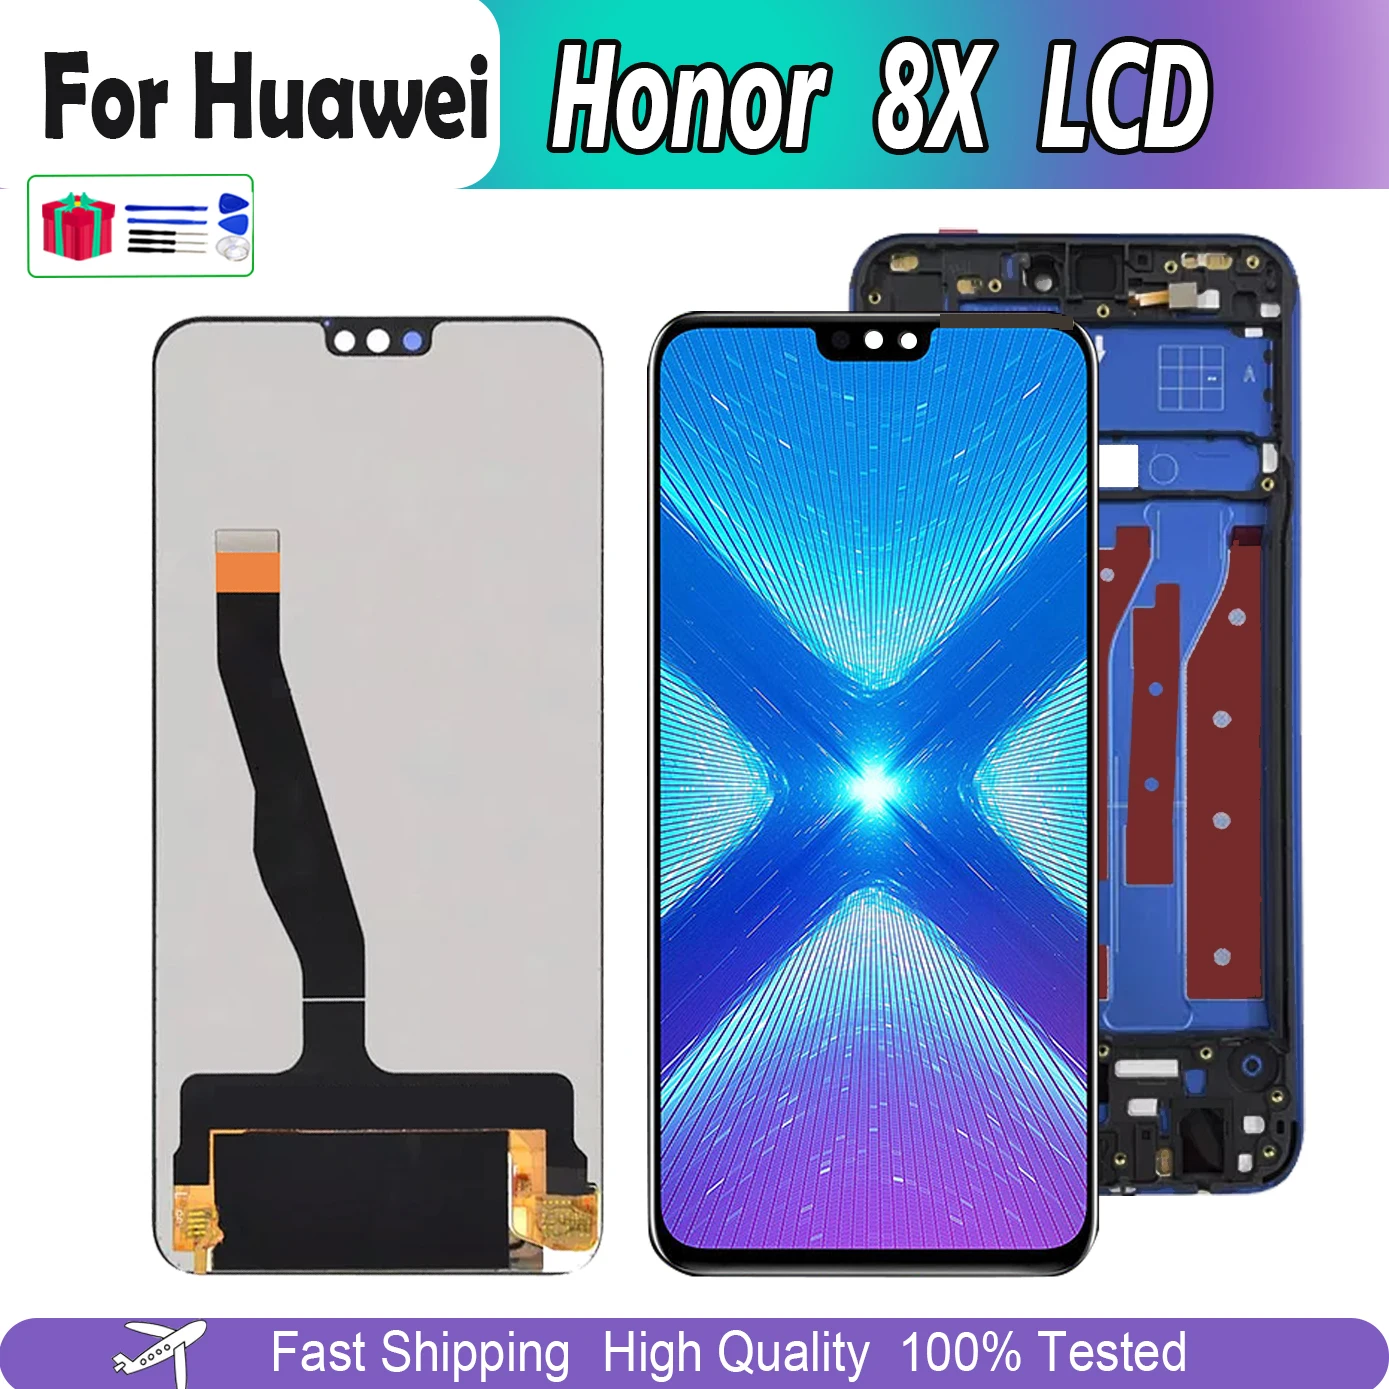 

6.5" LCD Original For Huawei Honor 8X JSN-AL00 JSN-L22 JSN-L21 LCD DIsplay Touch Screen Digitizer Replacement Assembly